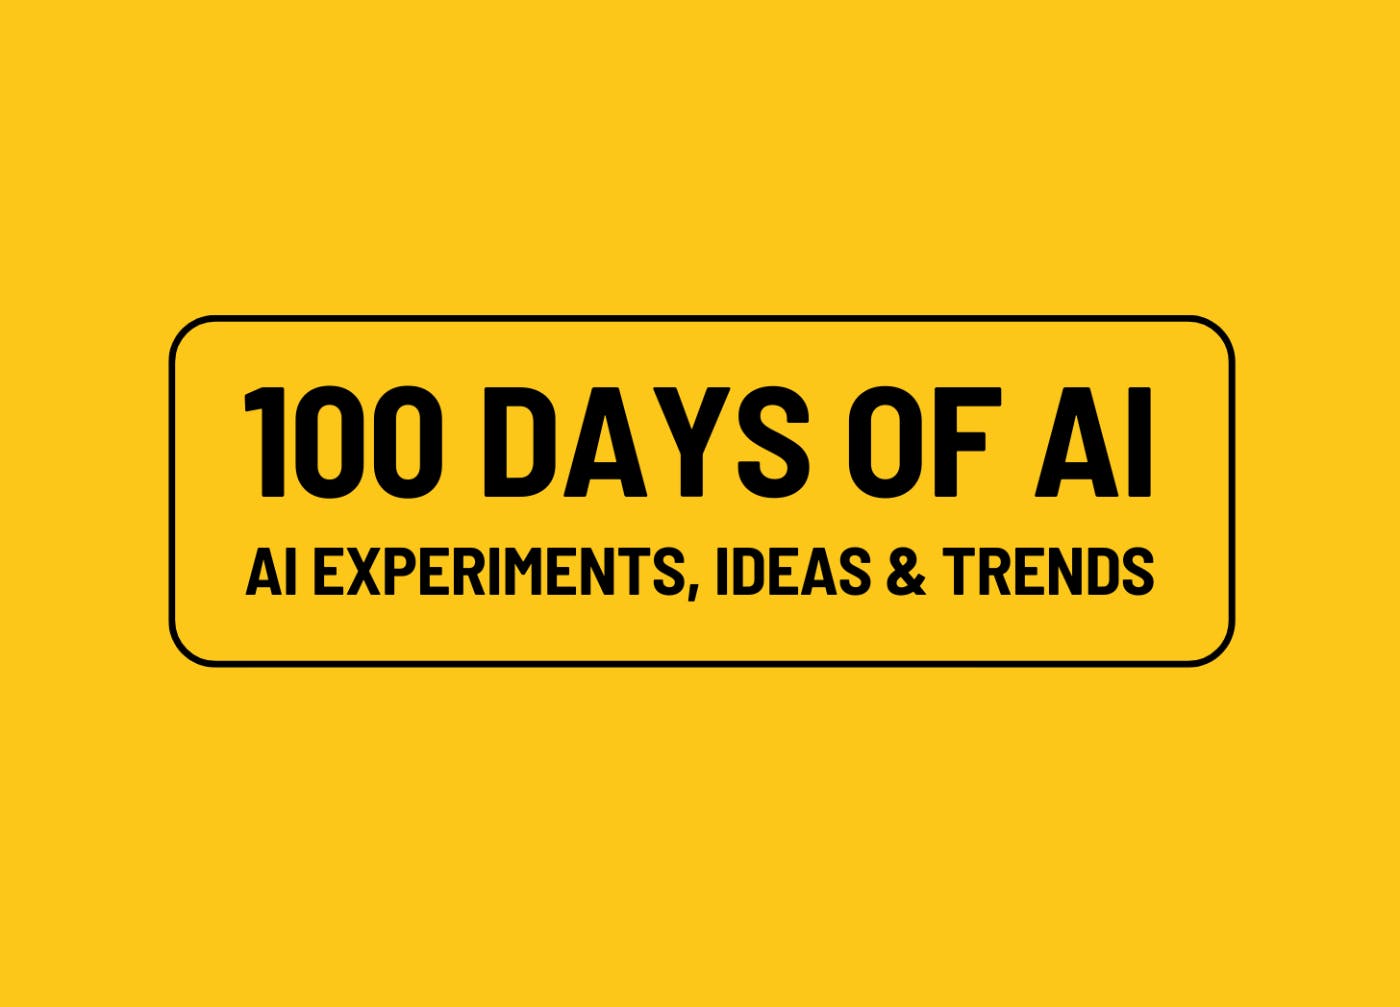 100 Days of AI, Day 10: How Effective is AI in Design Thinking for Solving Business Problems?